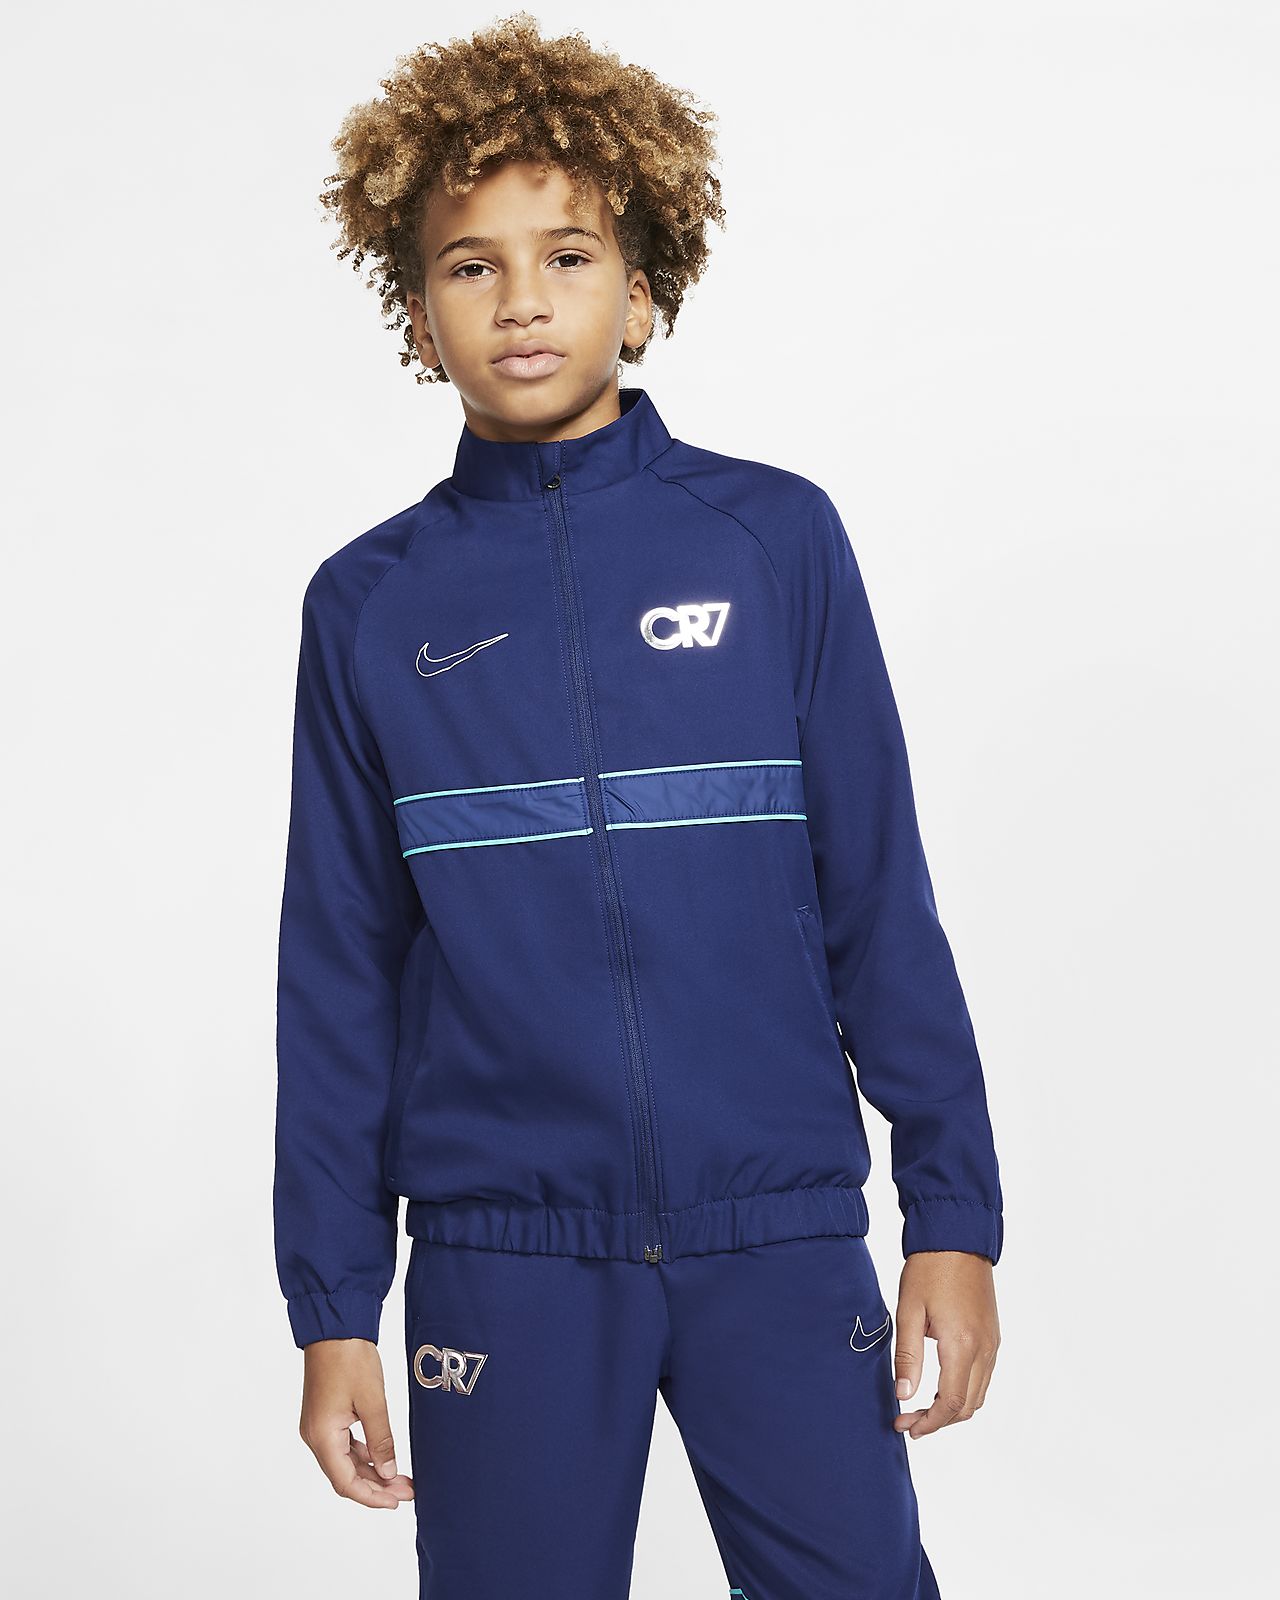 new cr7 tracksuit